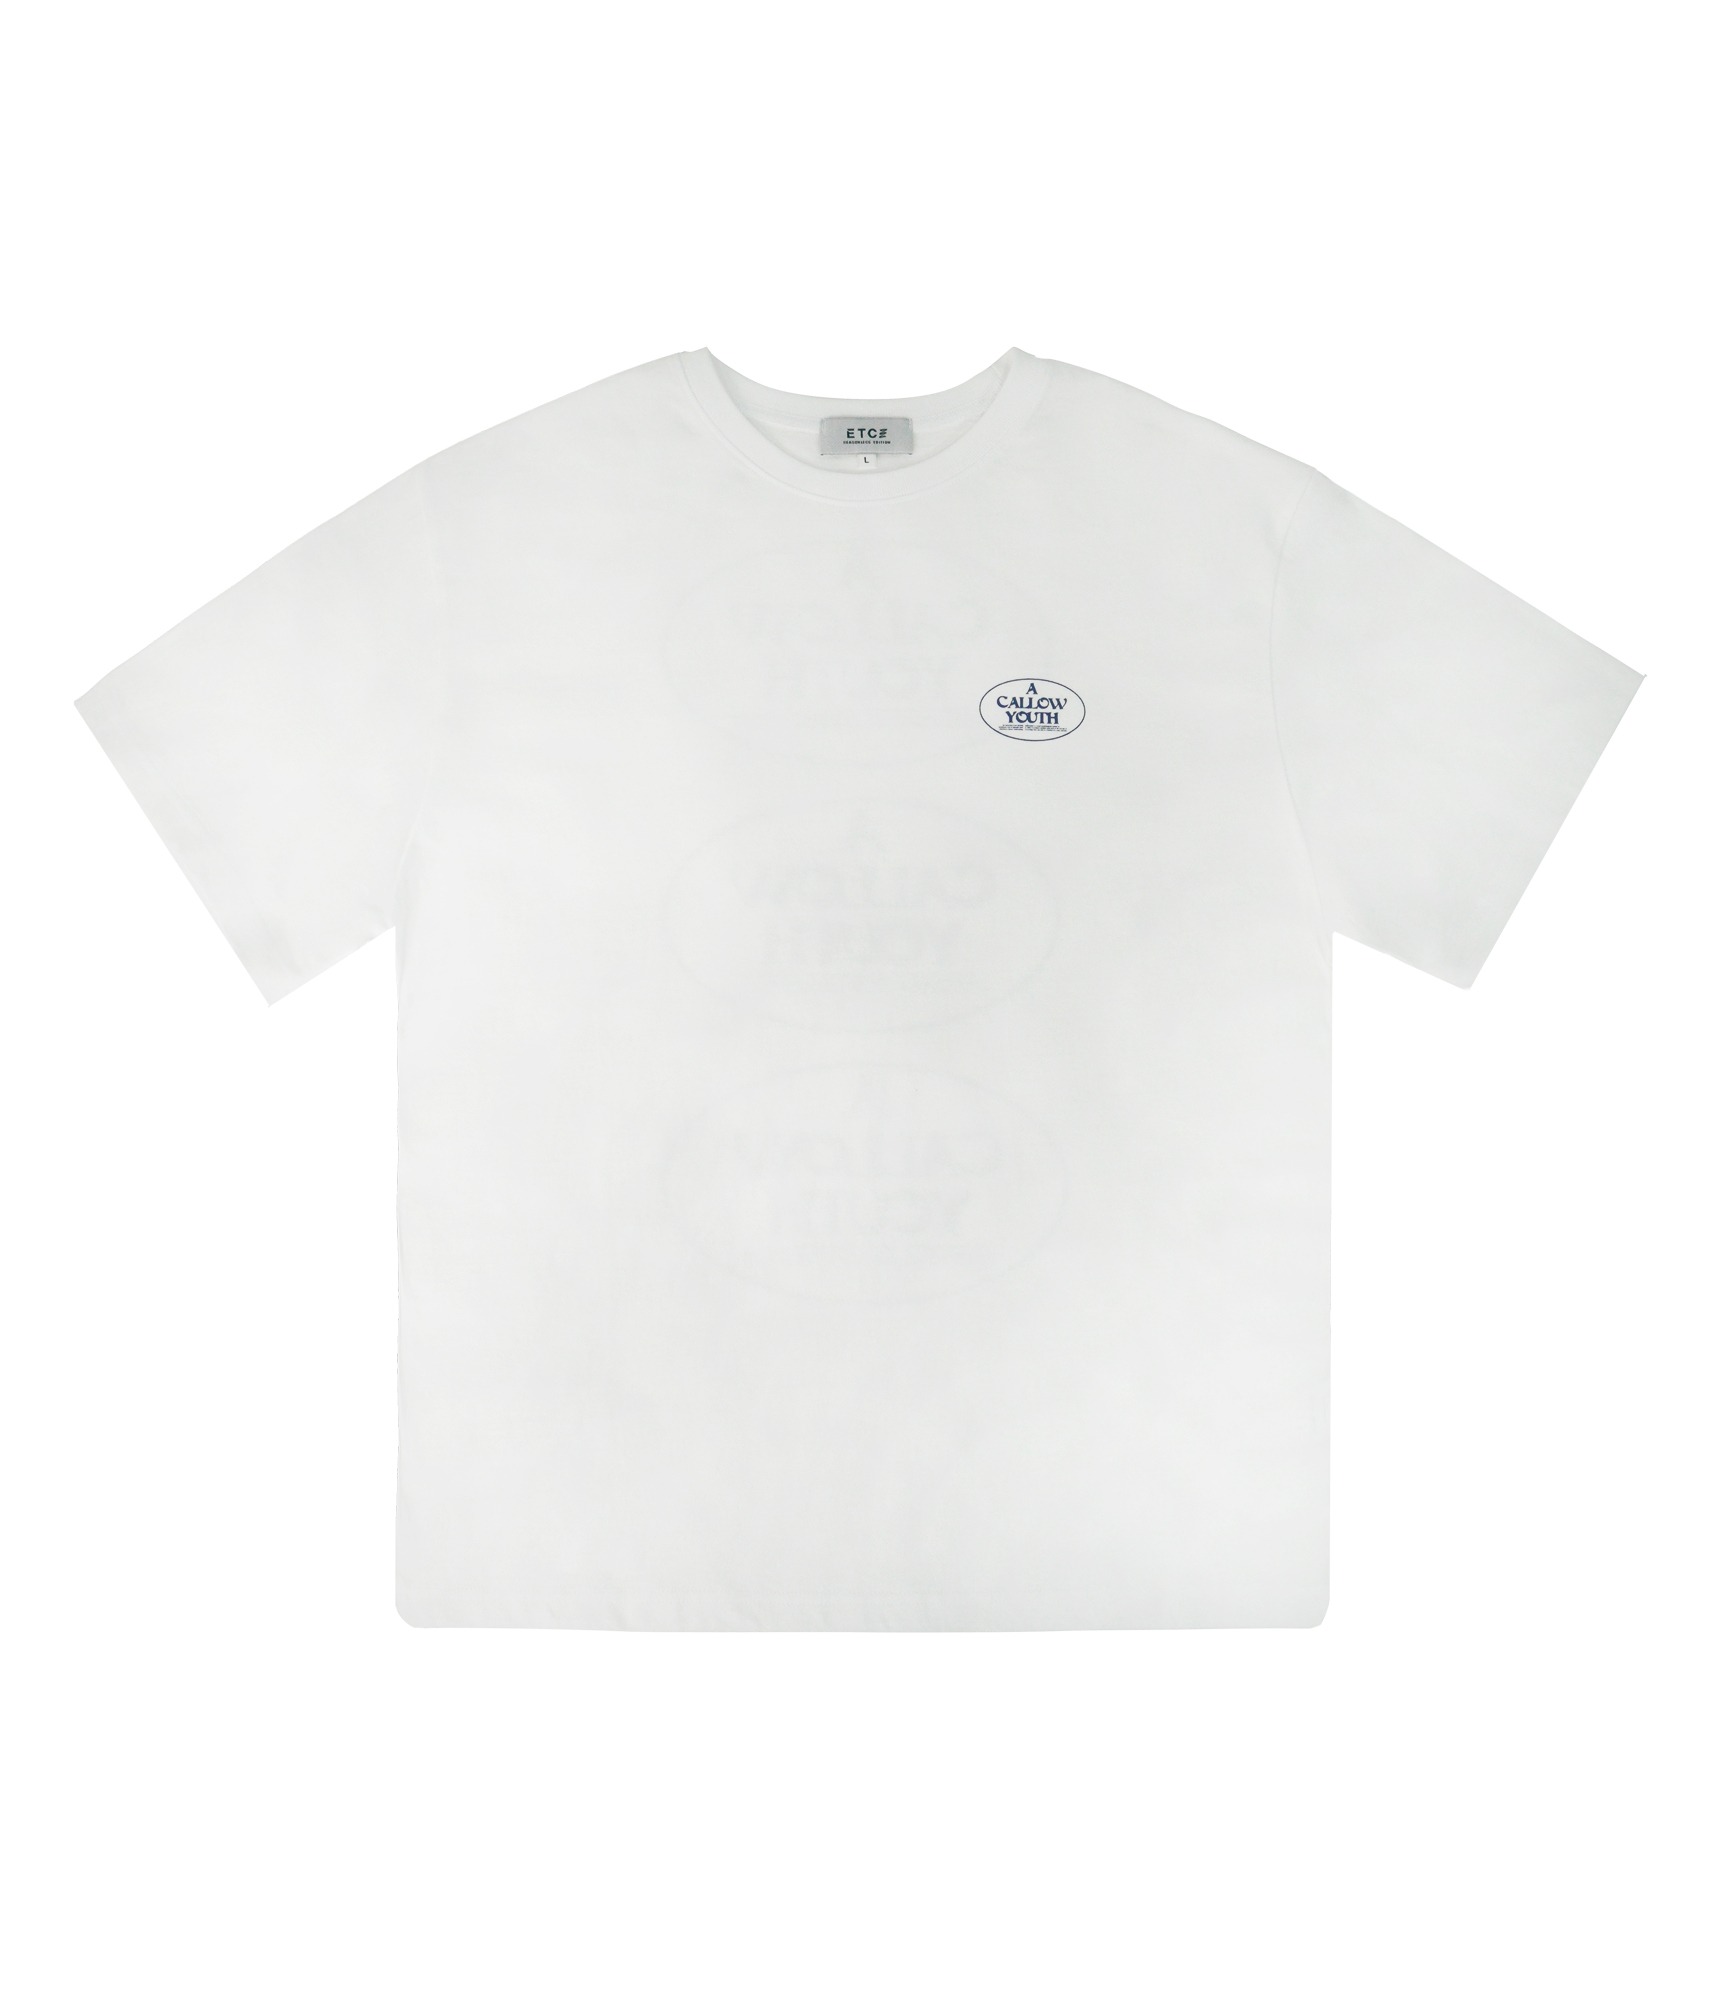 A CALLOW YOUTH TEE (WHITE)